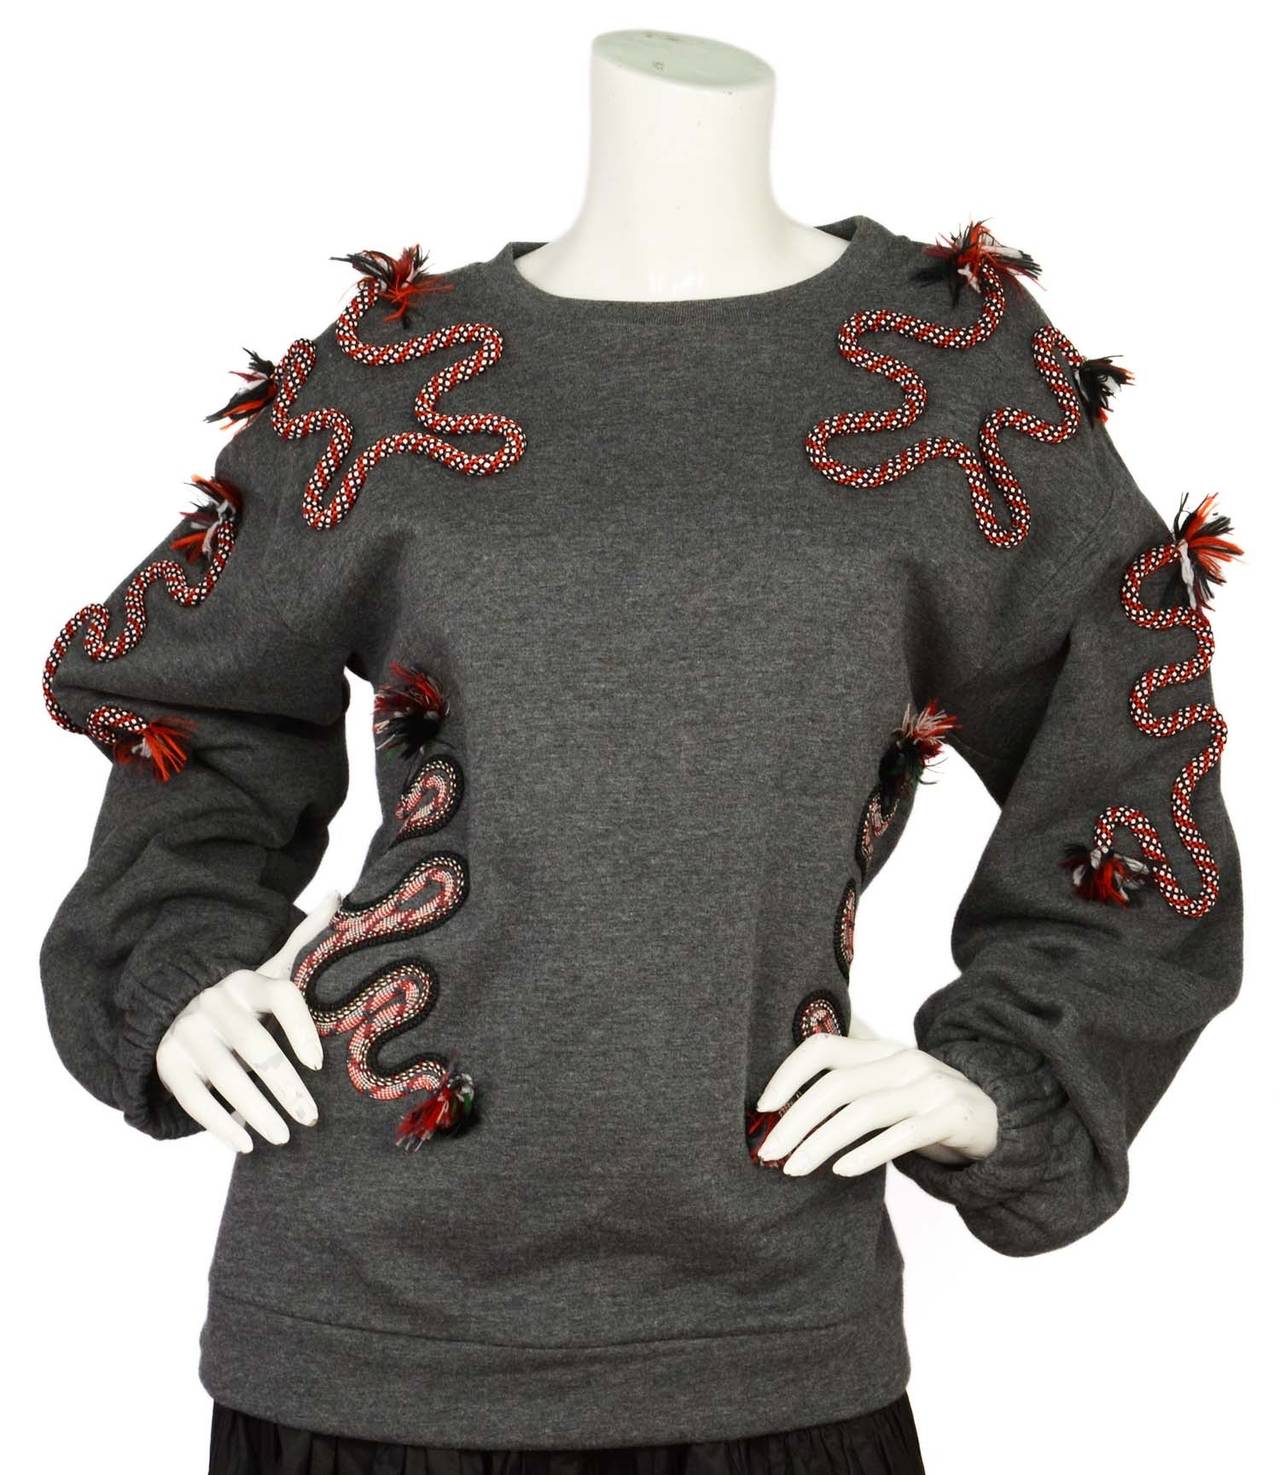 Stella McCartney Grey Sweater w/ Squiggle Red/White Rope Detailing
Features black red and white fringe at the end of rope squiggle

    Made in: Portugal
    Color: Grey with white, red, green and black trim
    Composition: 86% cotton, 14%